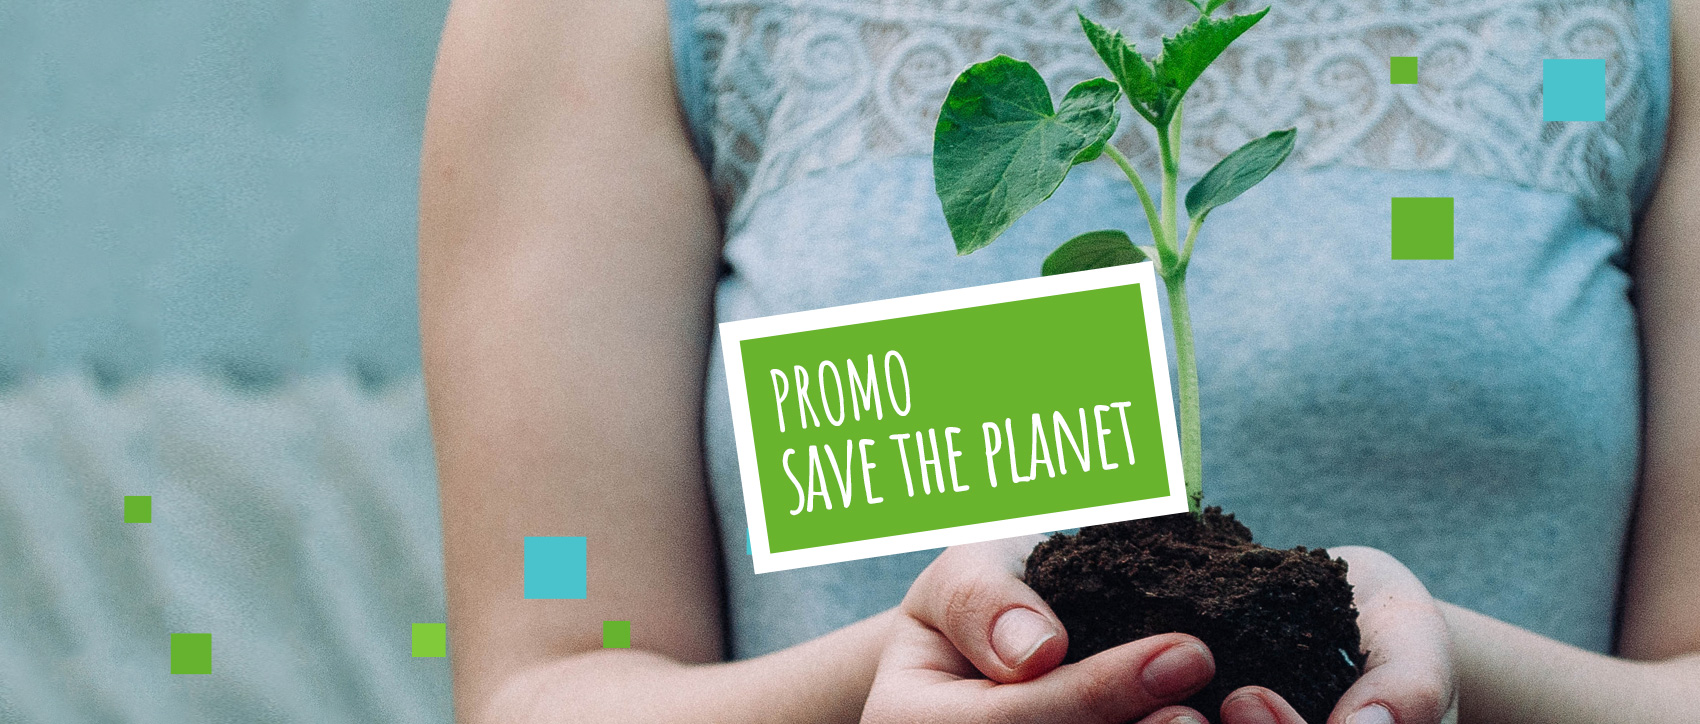 PROMO SAVE THE PLANET.